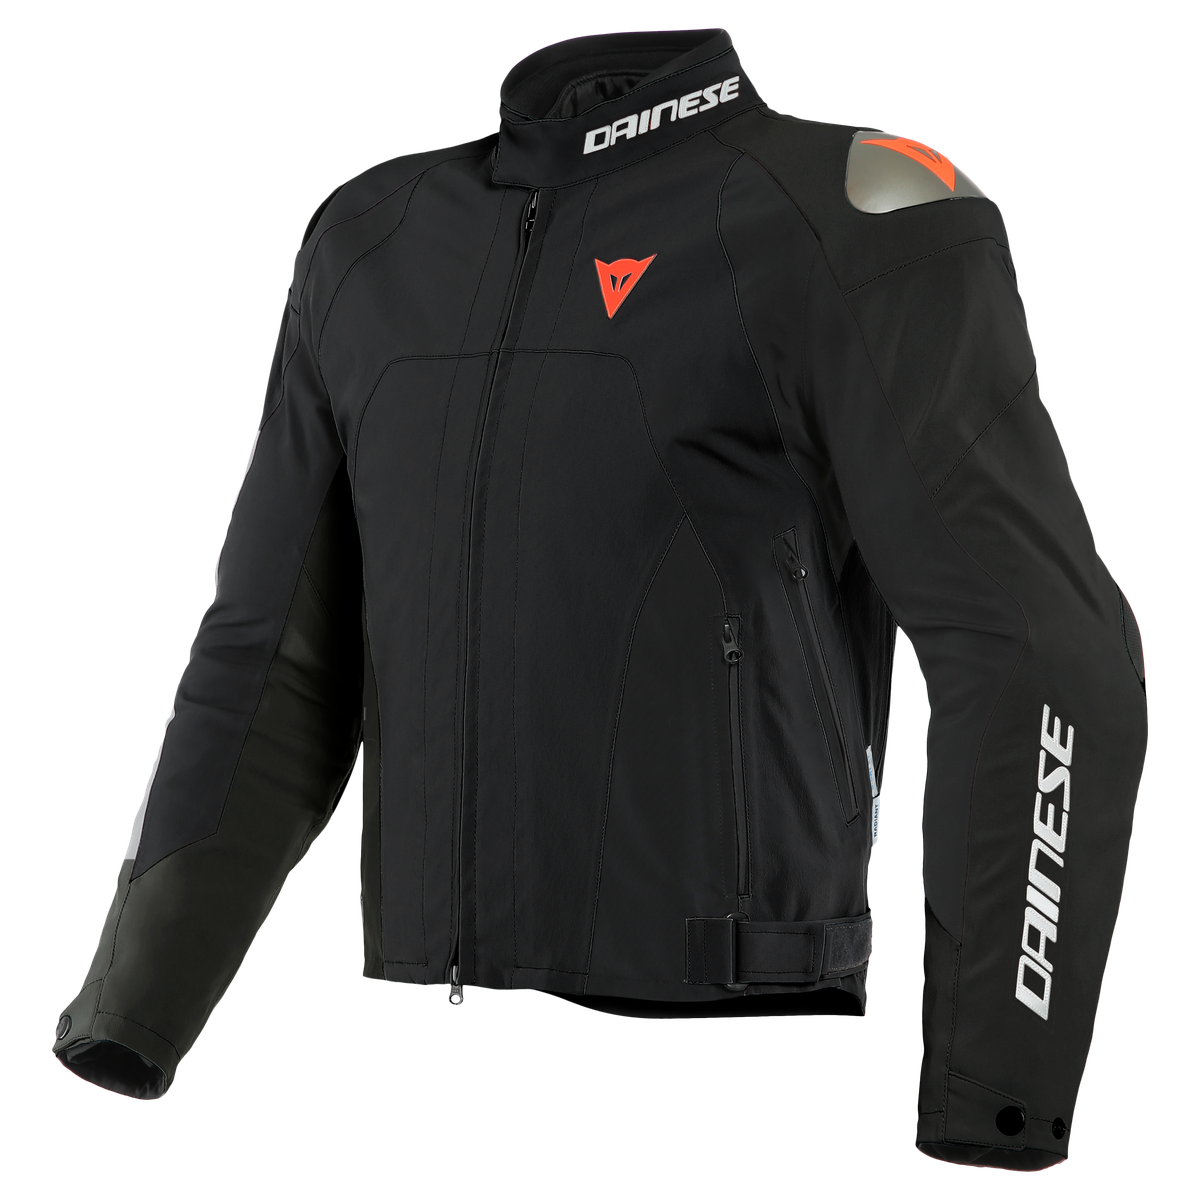 Viewing Images For Dainese Indomita D-Dry XT Jacket :: MotorcycleGear.com